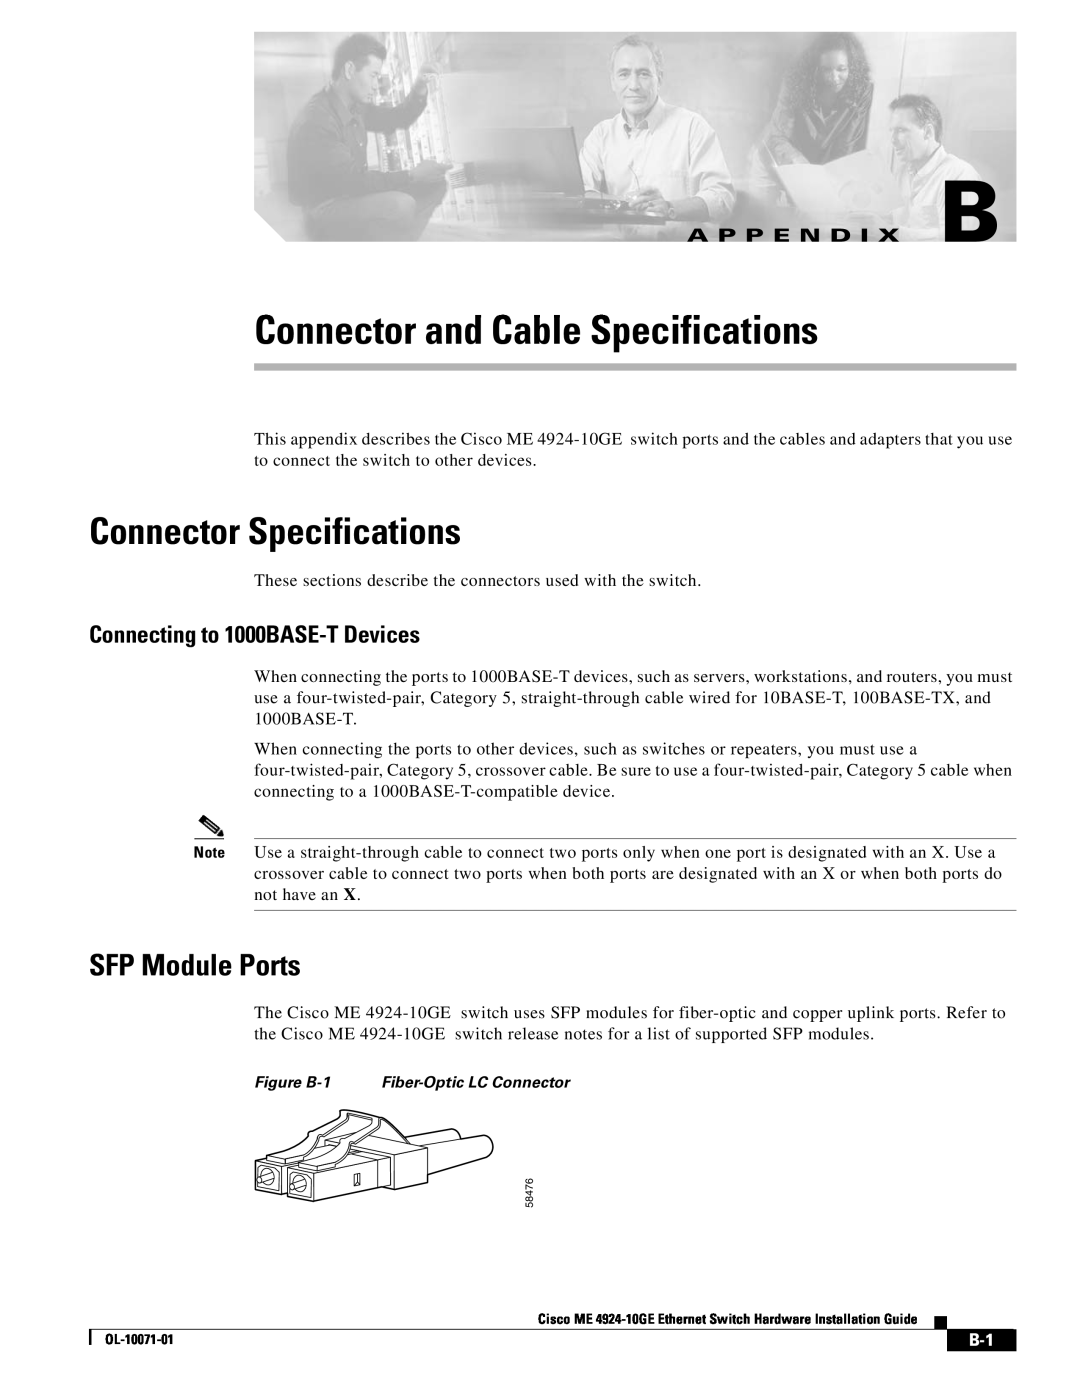 Cisco Systems ME 4924-10GE Connector and Cable Specifications, Connector Specifications, Connecting to 1000BASE-T Devices 